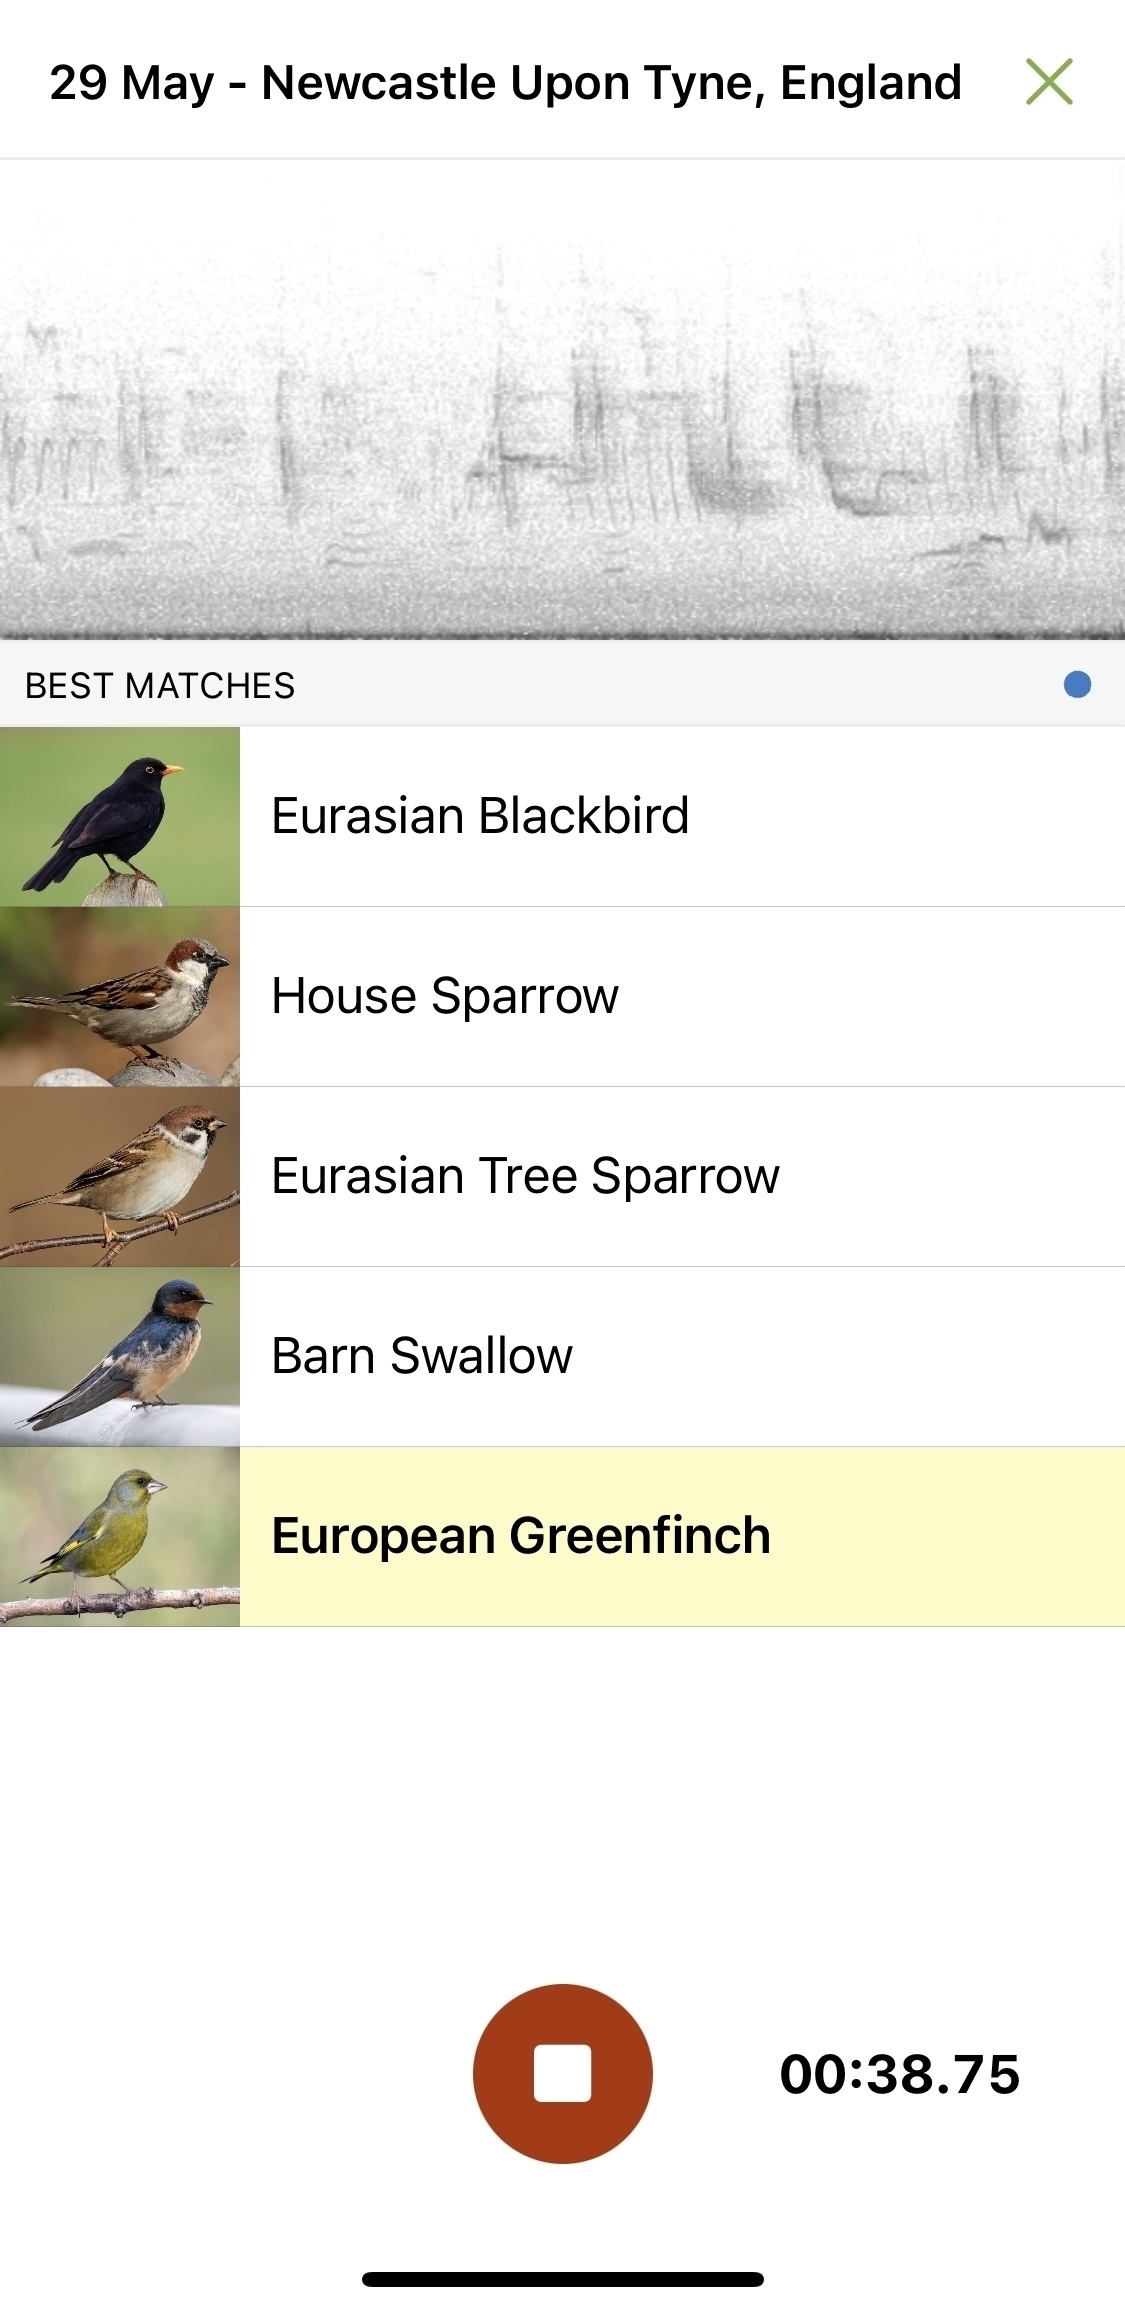 Screenshot of Merlin app during a recording. Sound wave at top followed by a list of all the active birds including name and thumbnail picture. The birds listed are: Eurasian Blackbird, House Sparrow, Eurasian Tree Sparrow, Barn Swallow, European Greenfinch.